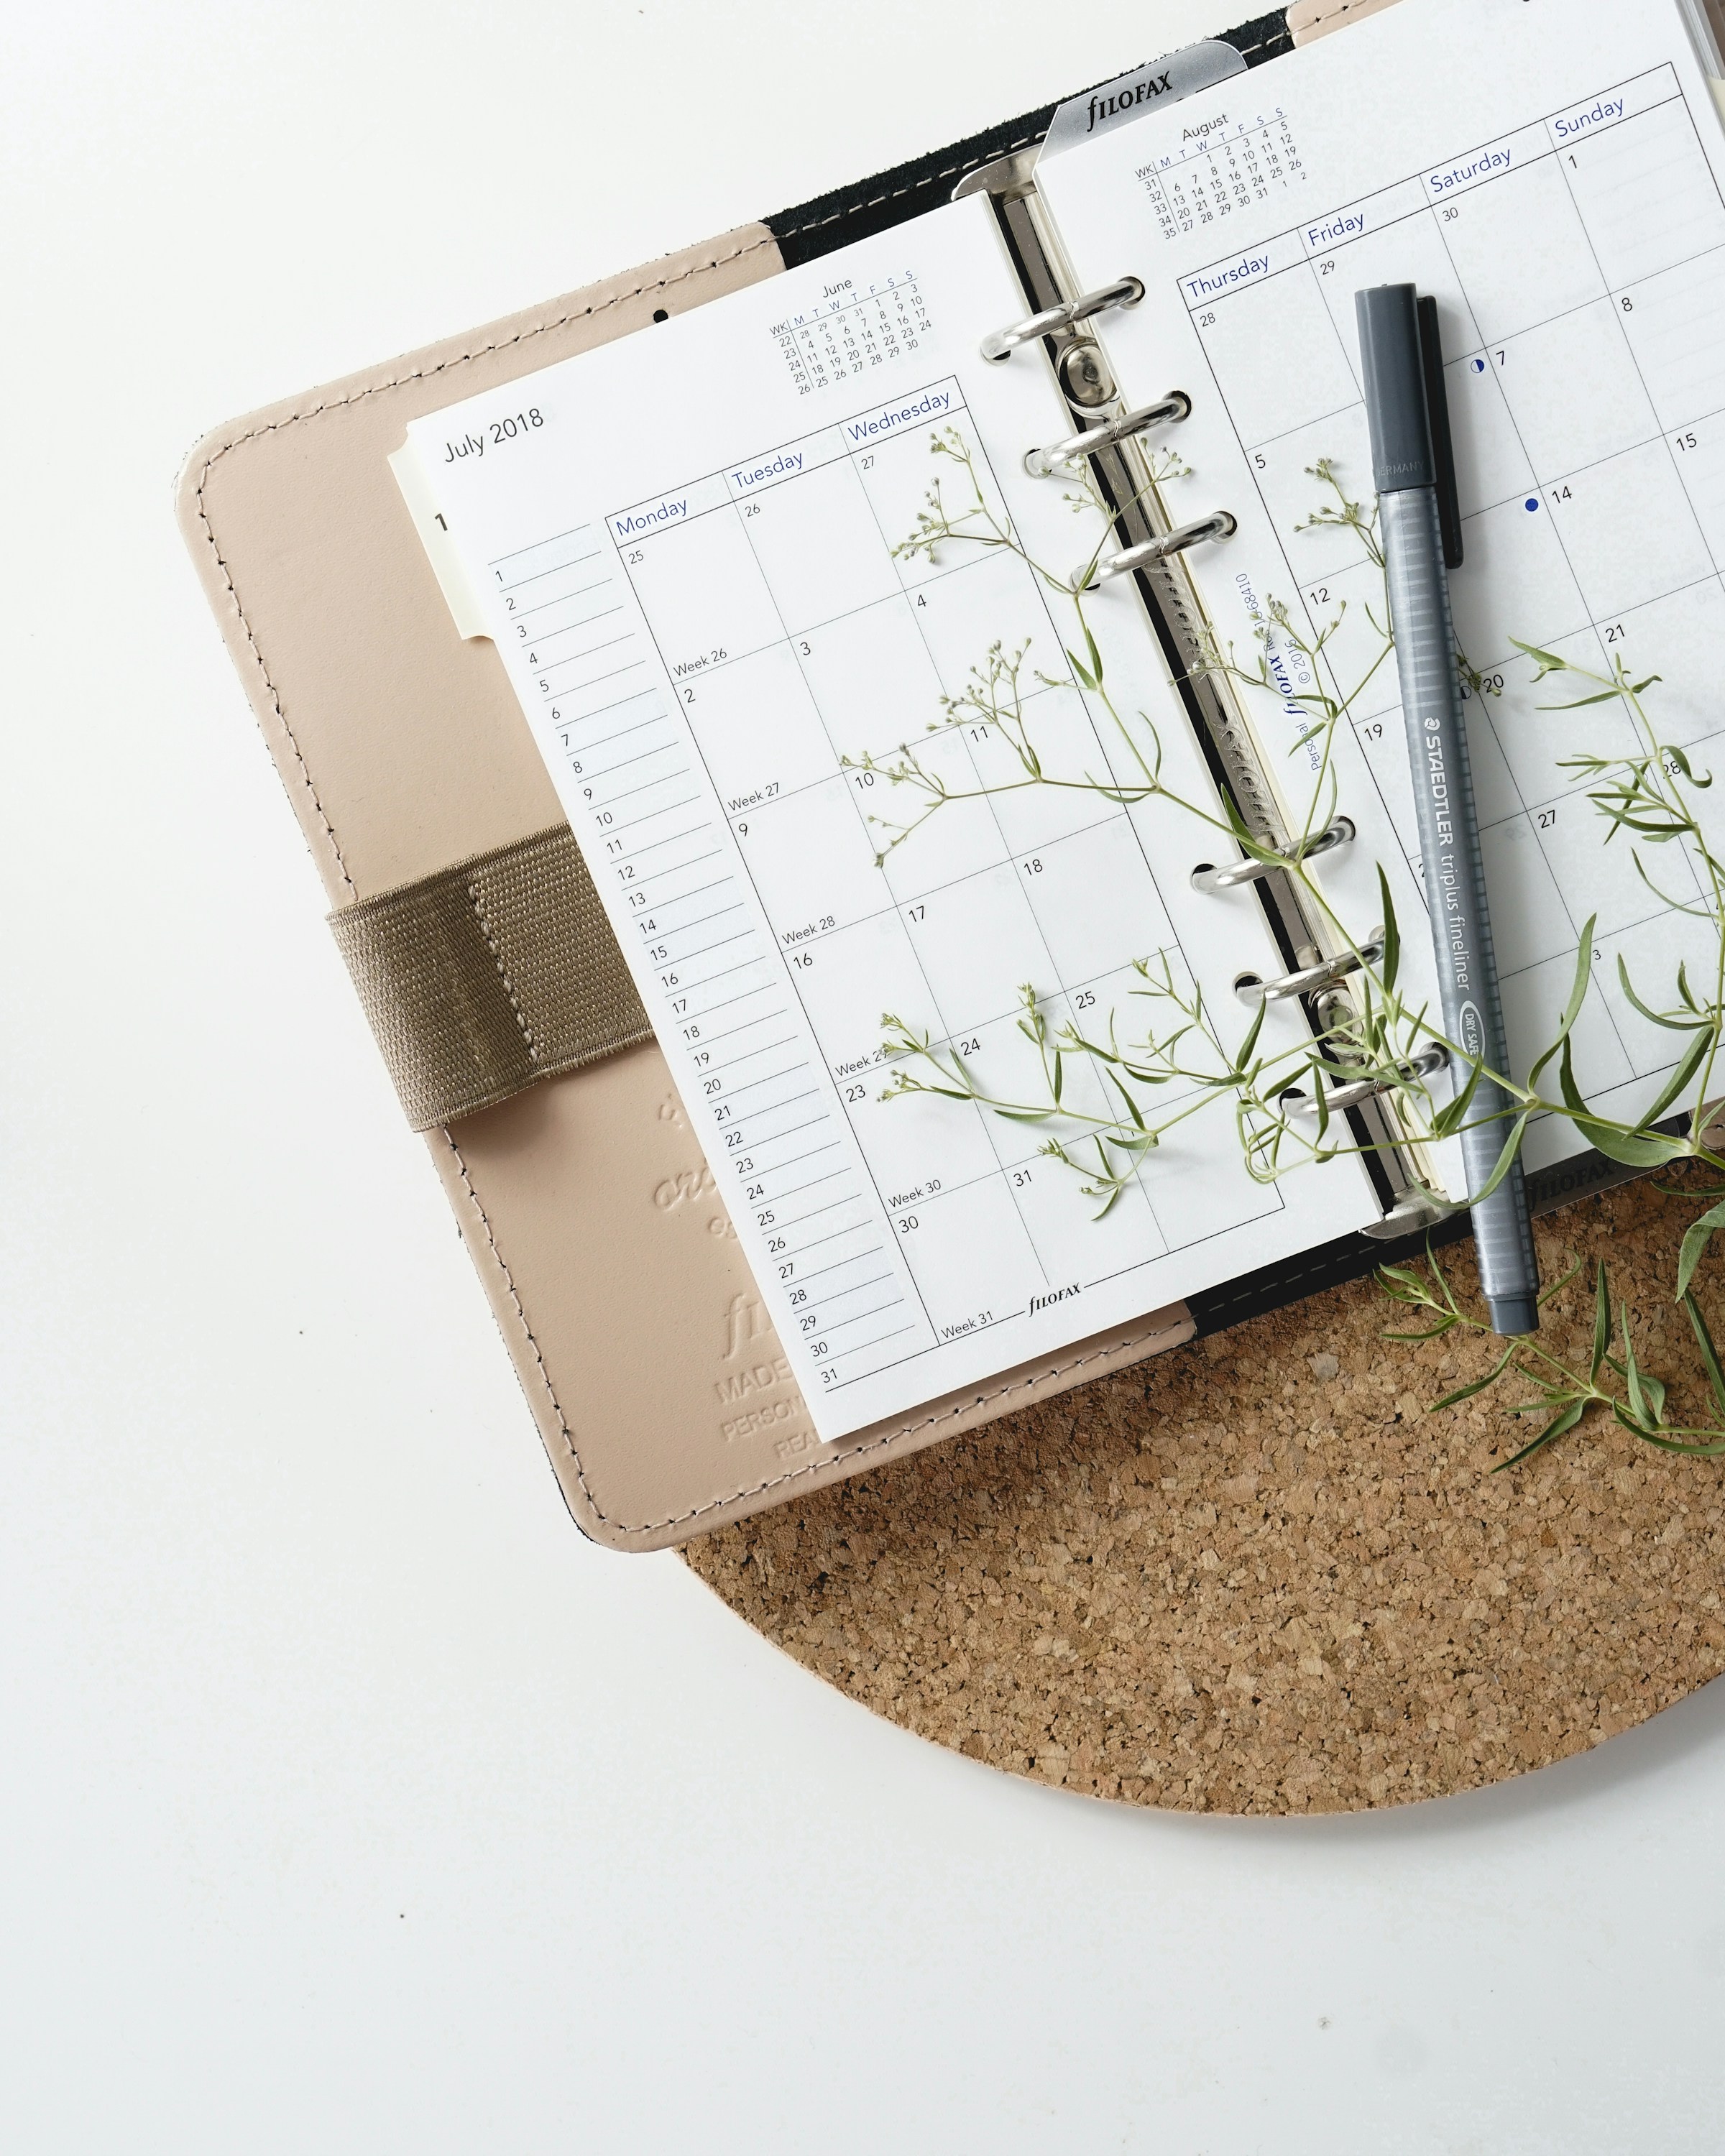 A notebook with a pen | Source: Unsplash